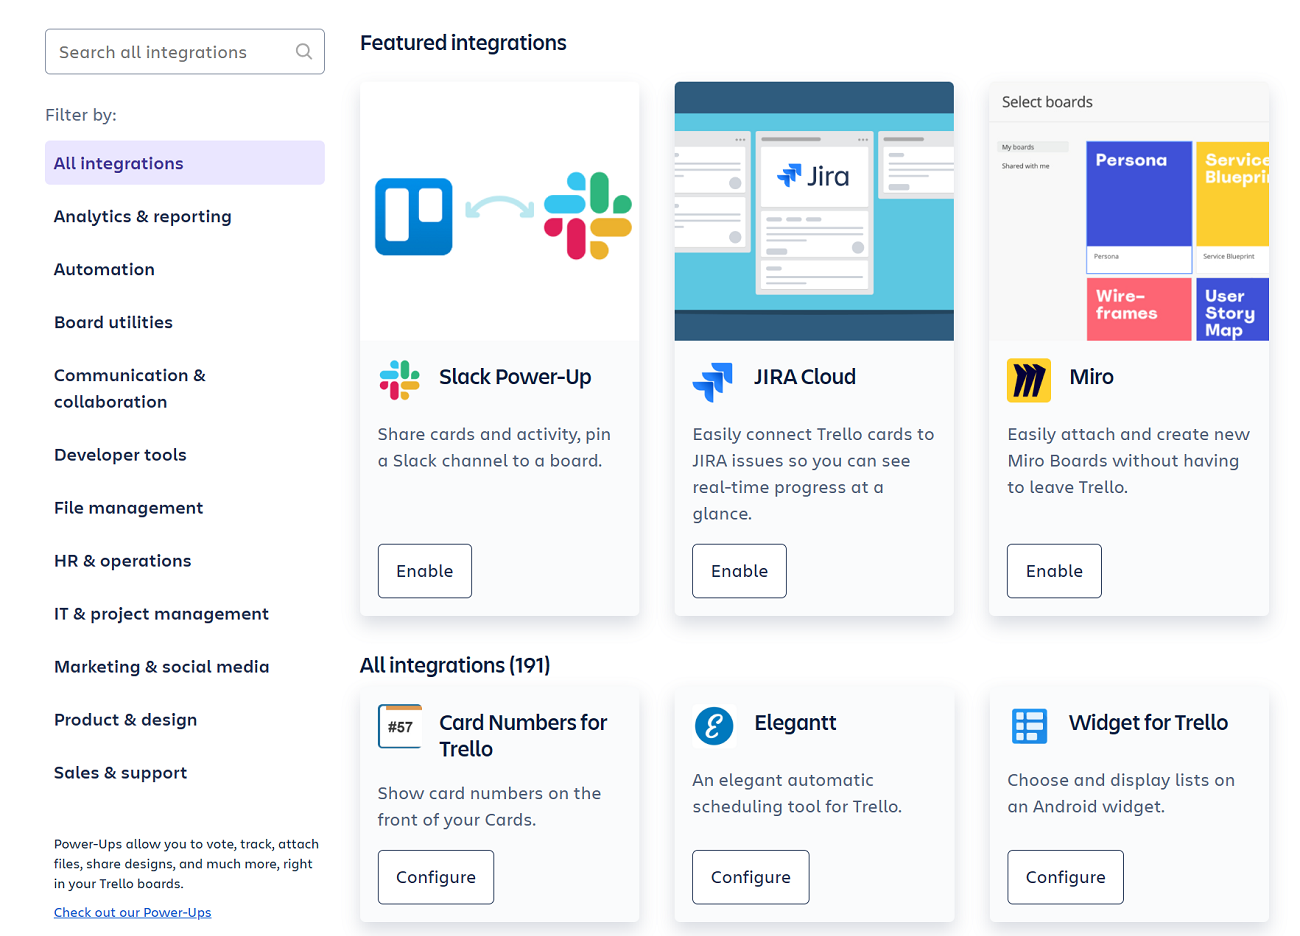 Some of the integrations featured in Trello.